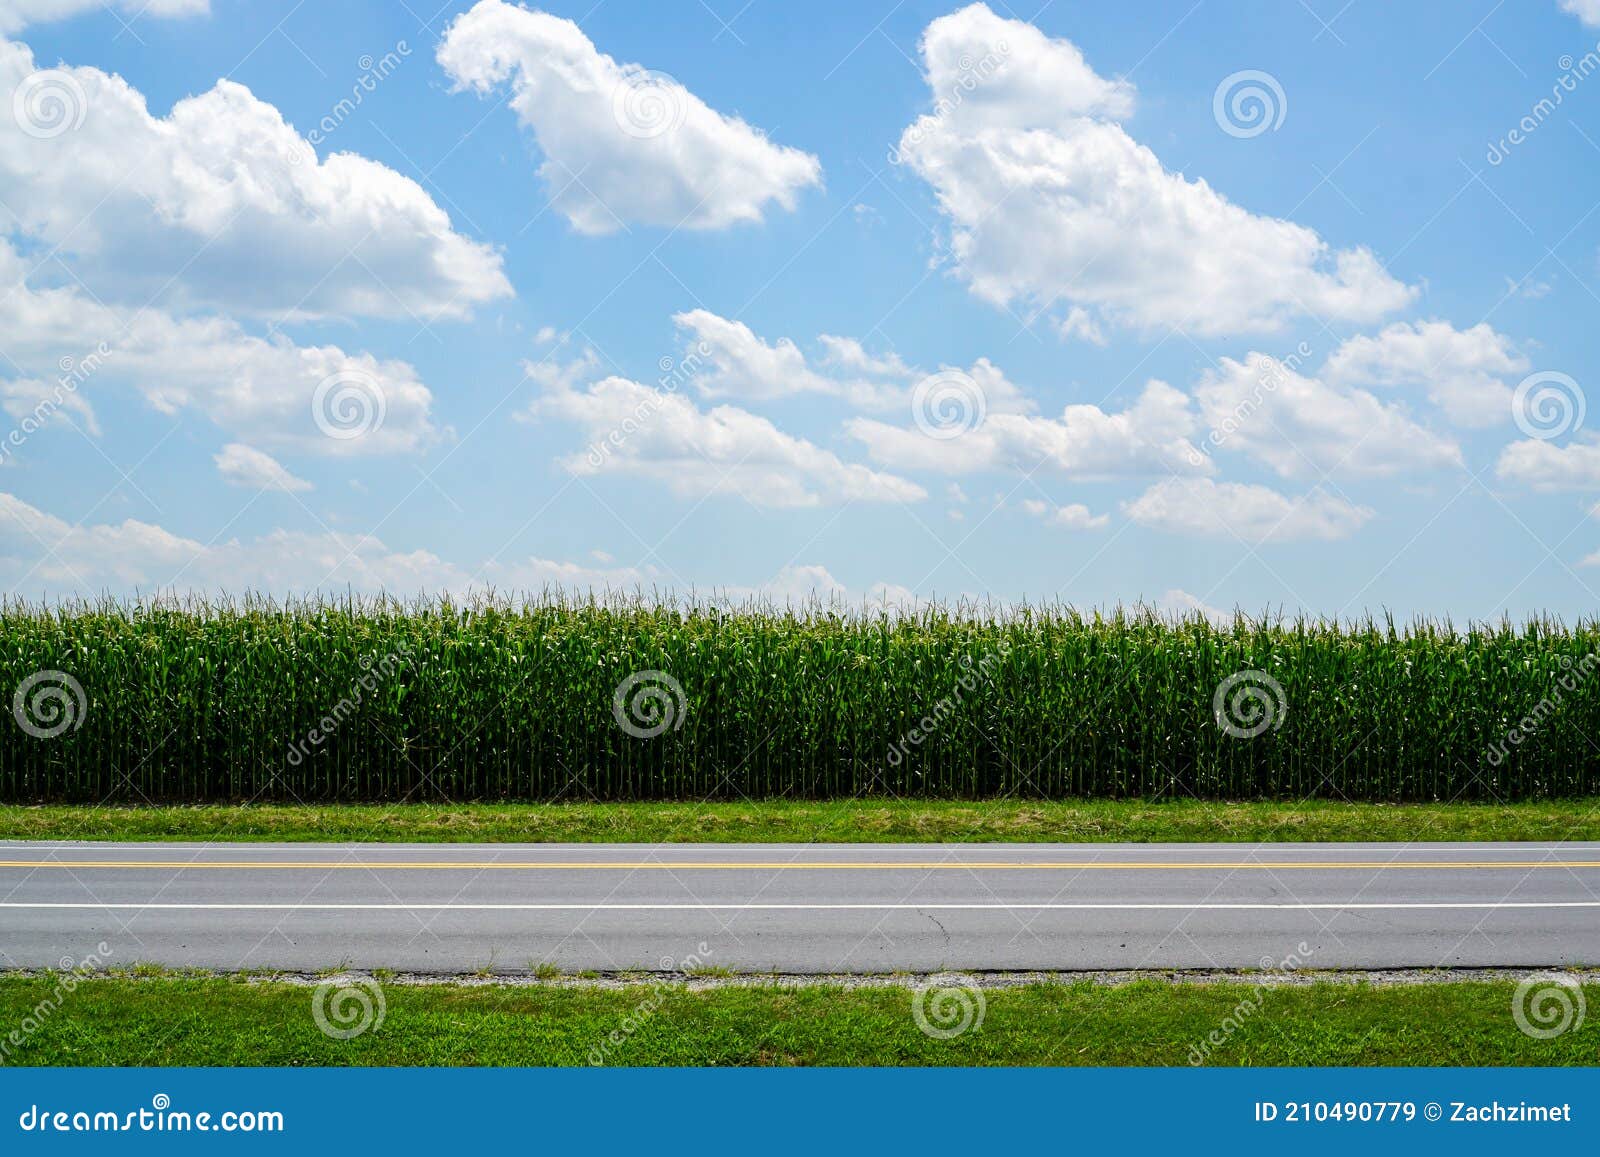 Road And Corn Field With Clouds In A Blue Sky Stock Image Image Of